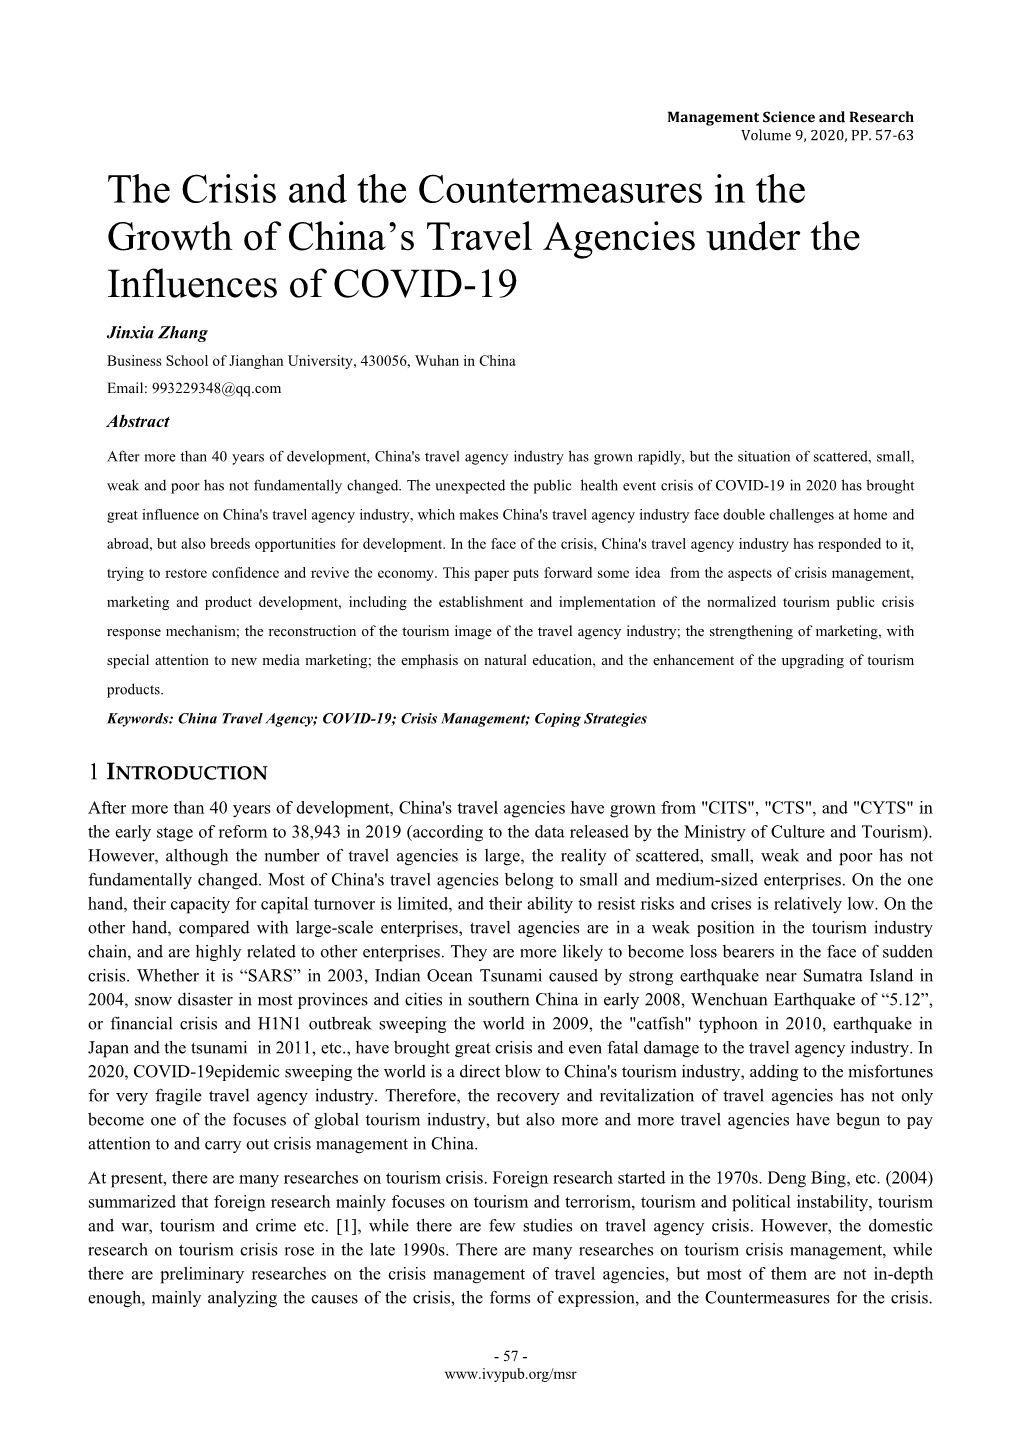 The Crisis and the Countermeasures in the Growth of China's Travel